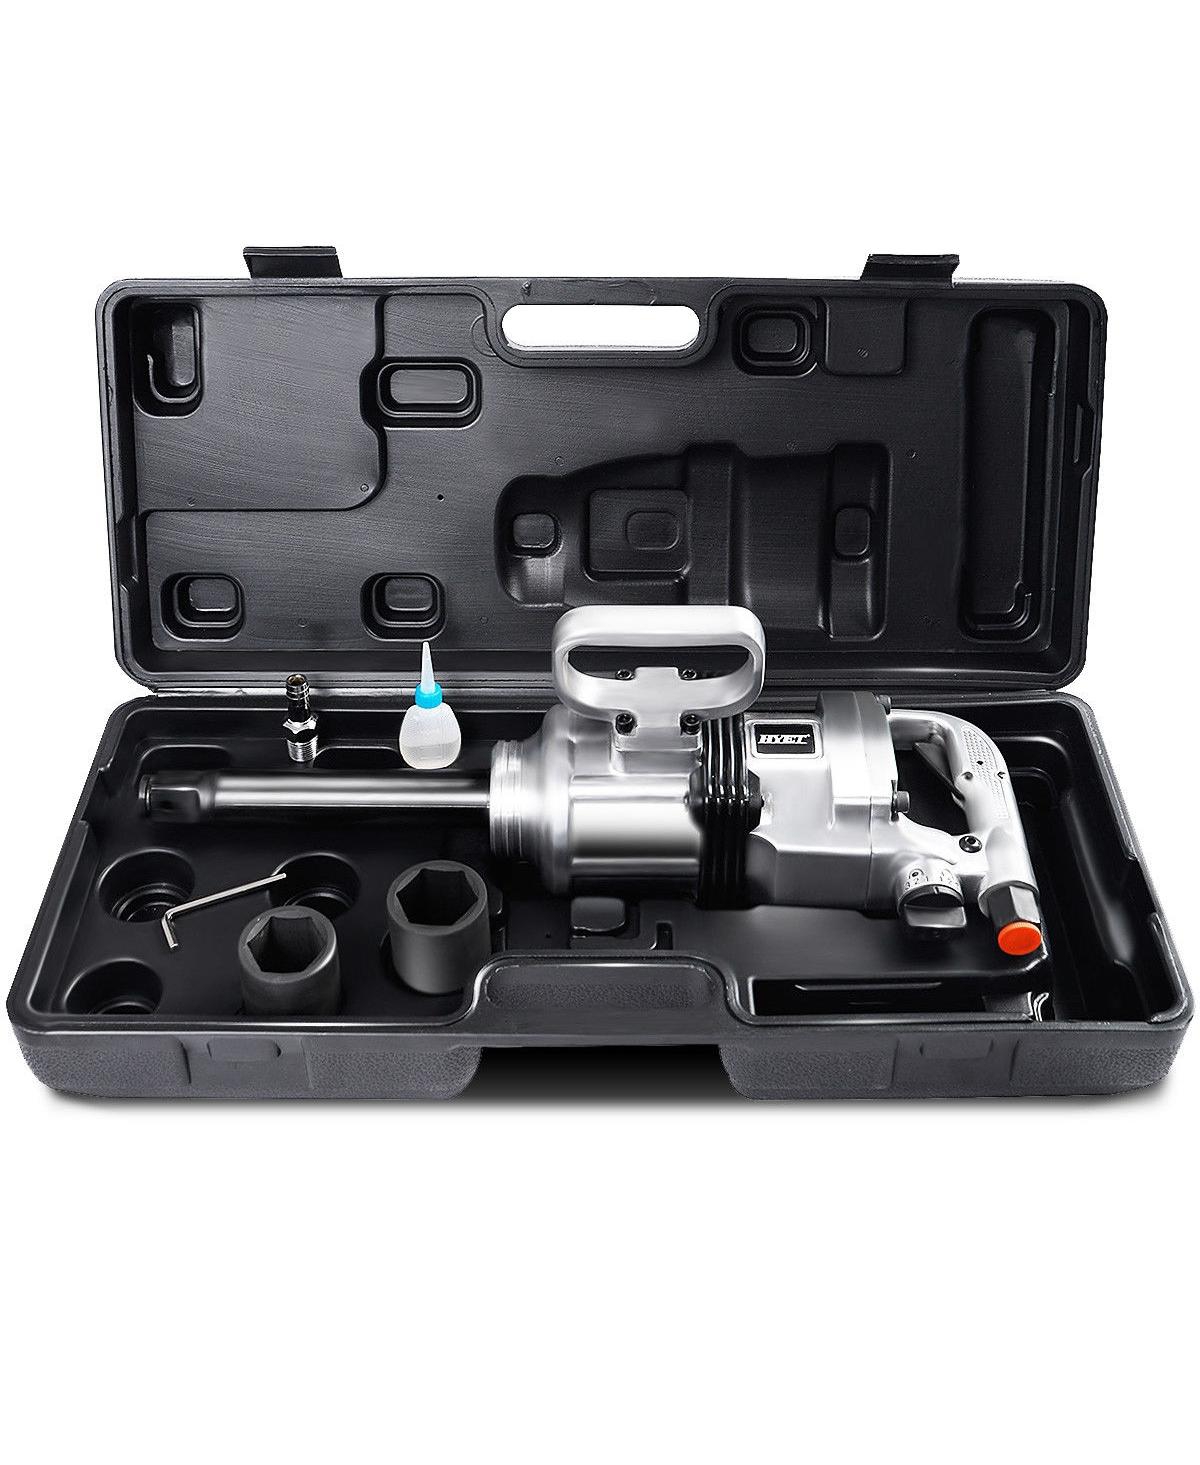 Heavy Duty 1 Inch Air Impact Wrench Gun with Case - Silver